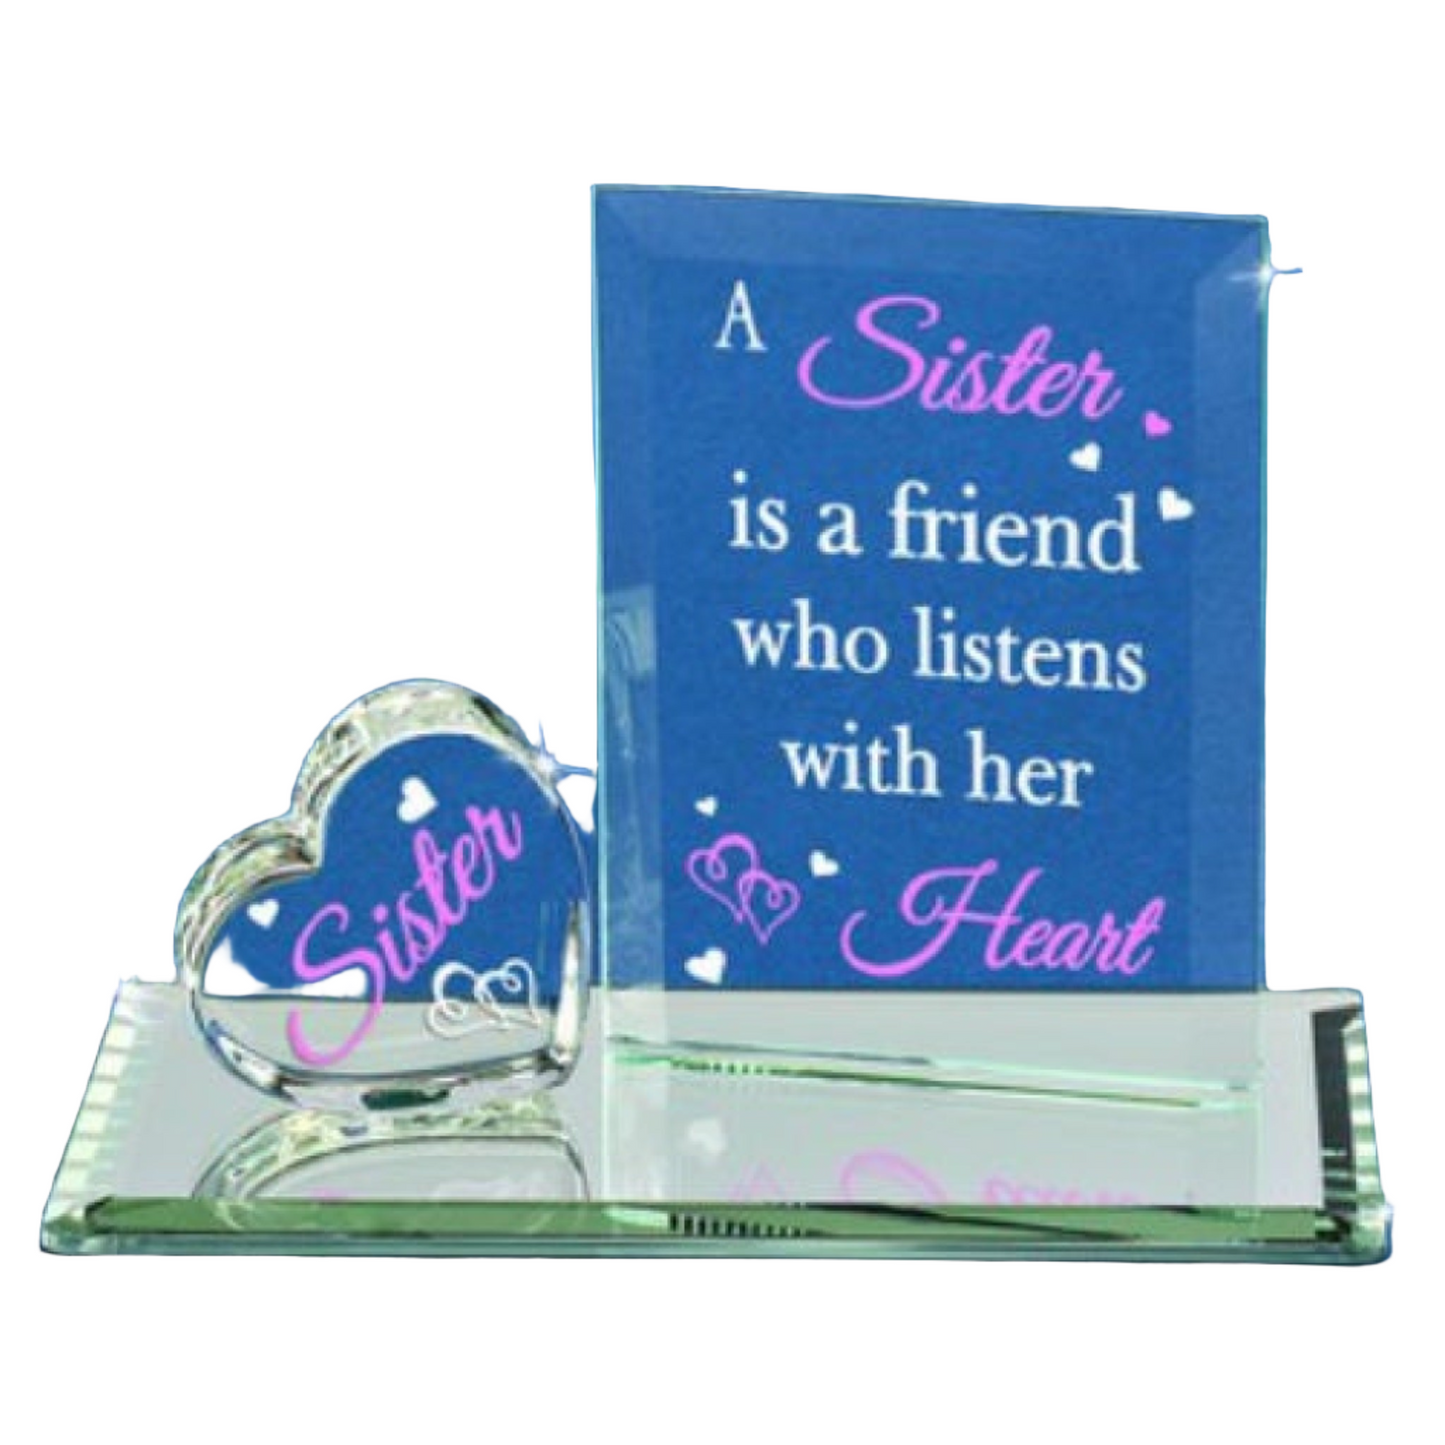 Glass Baron "Listens With Her Heart" Sister Figurine Plaque